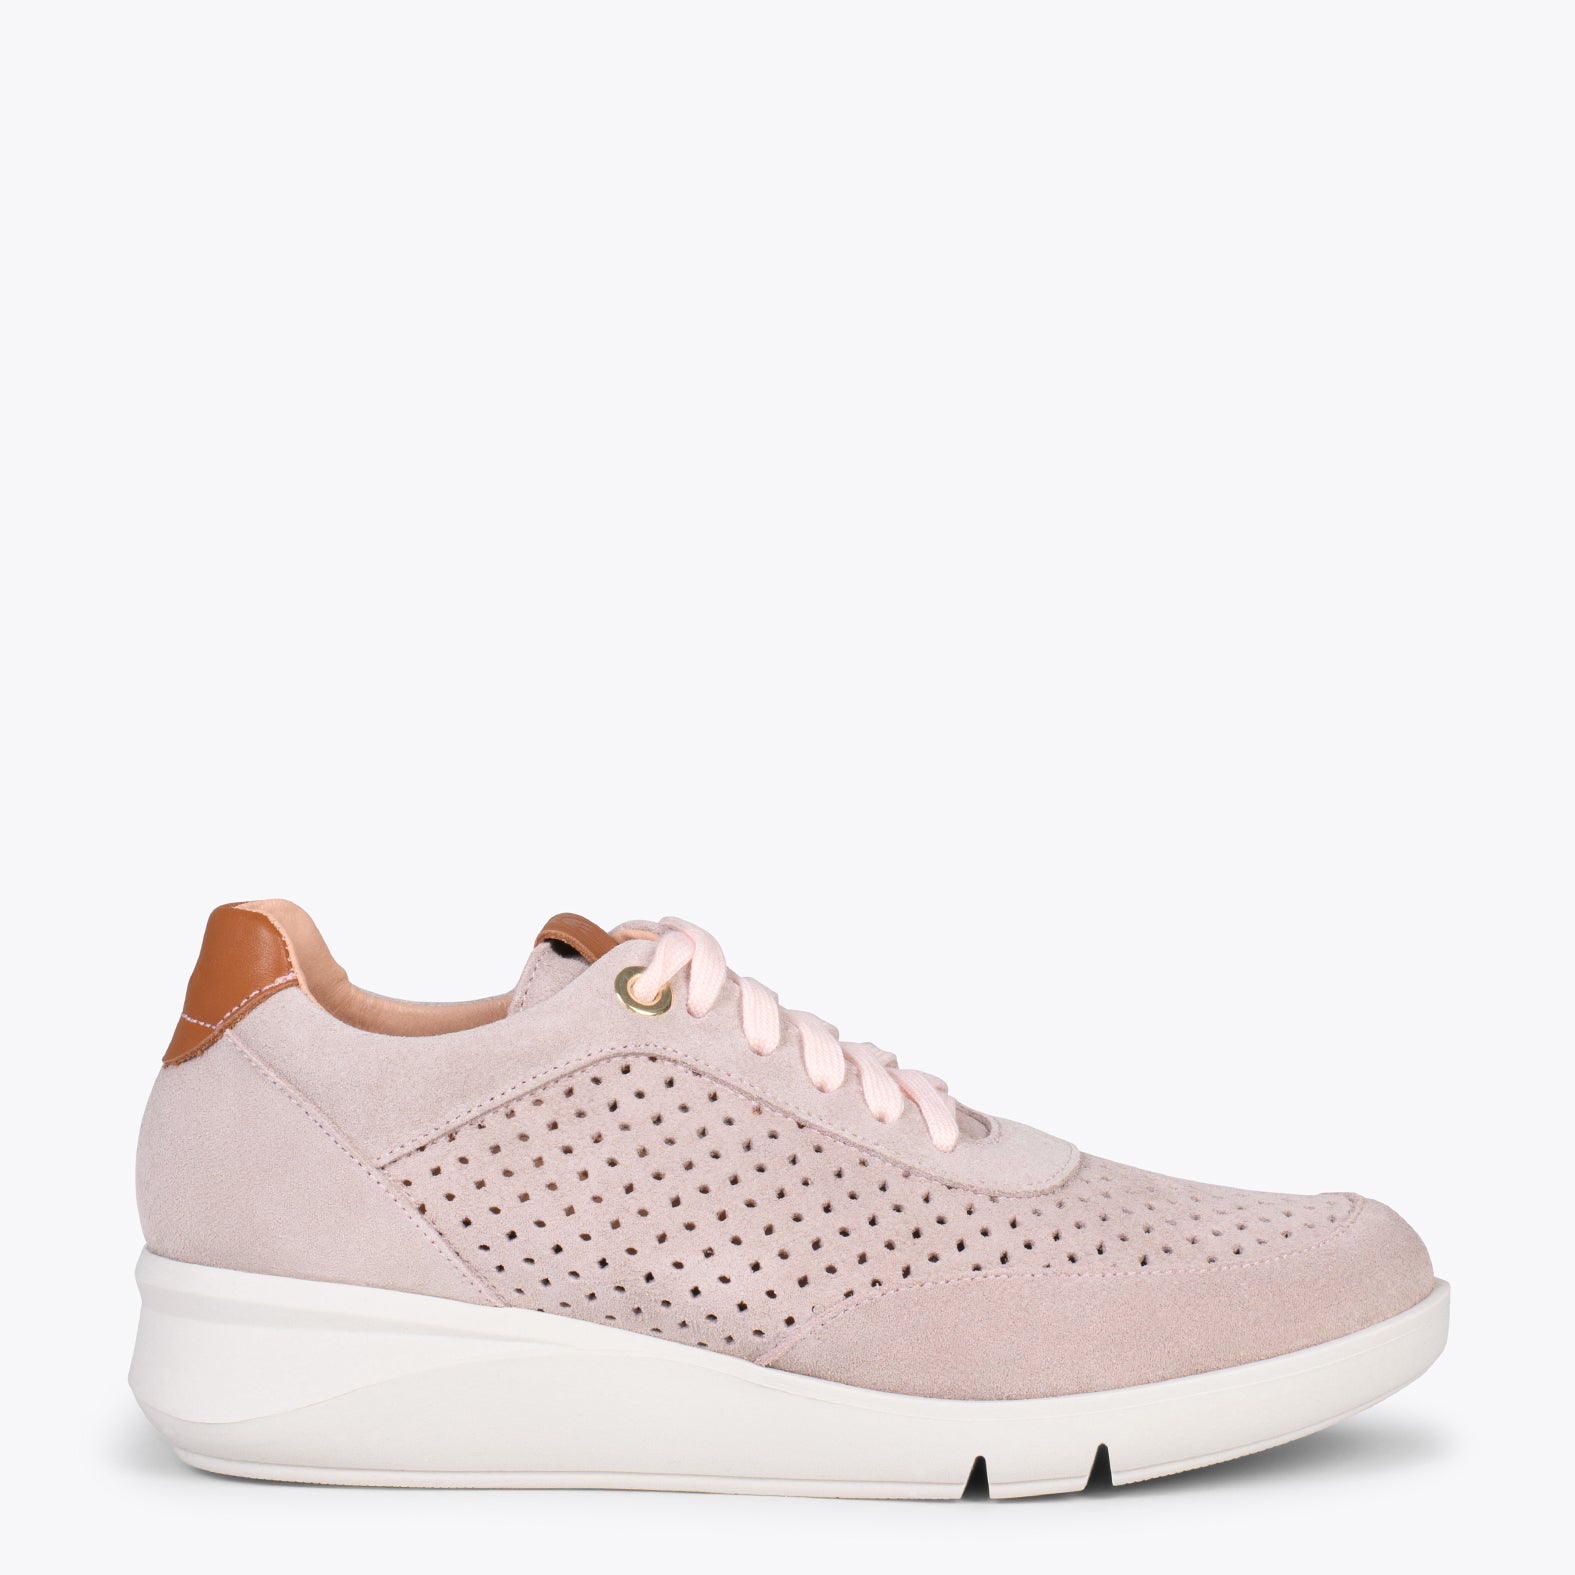 SPORT BLUCHER – NUDE sneakers with wedge